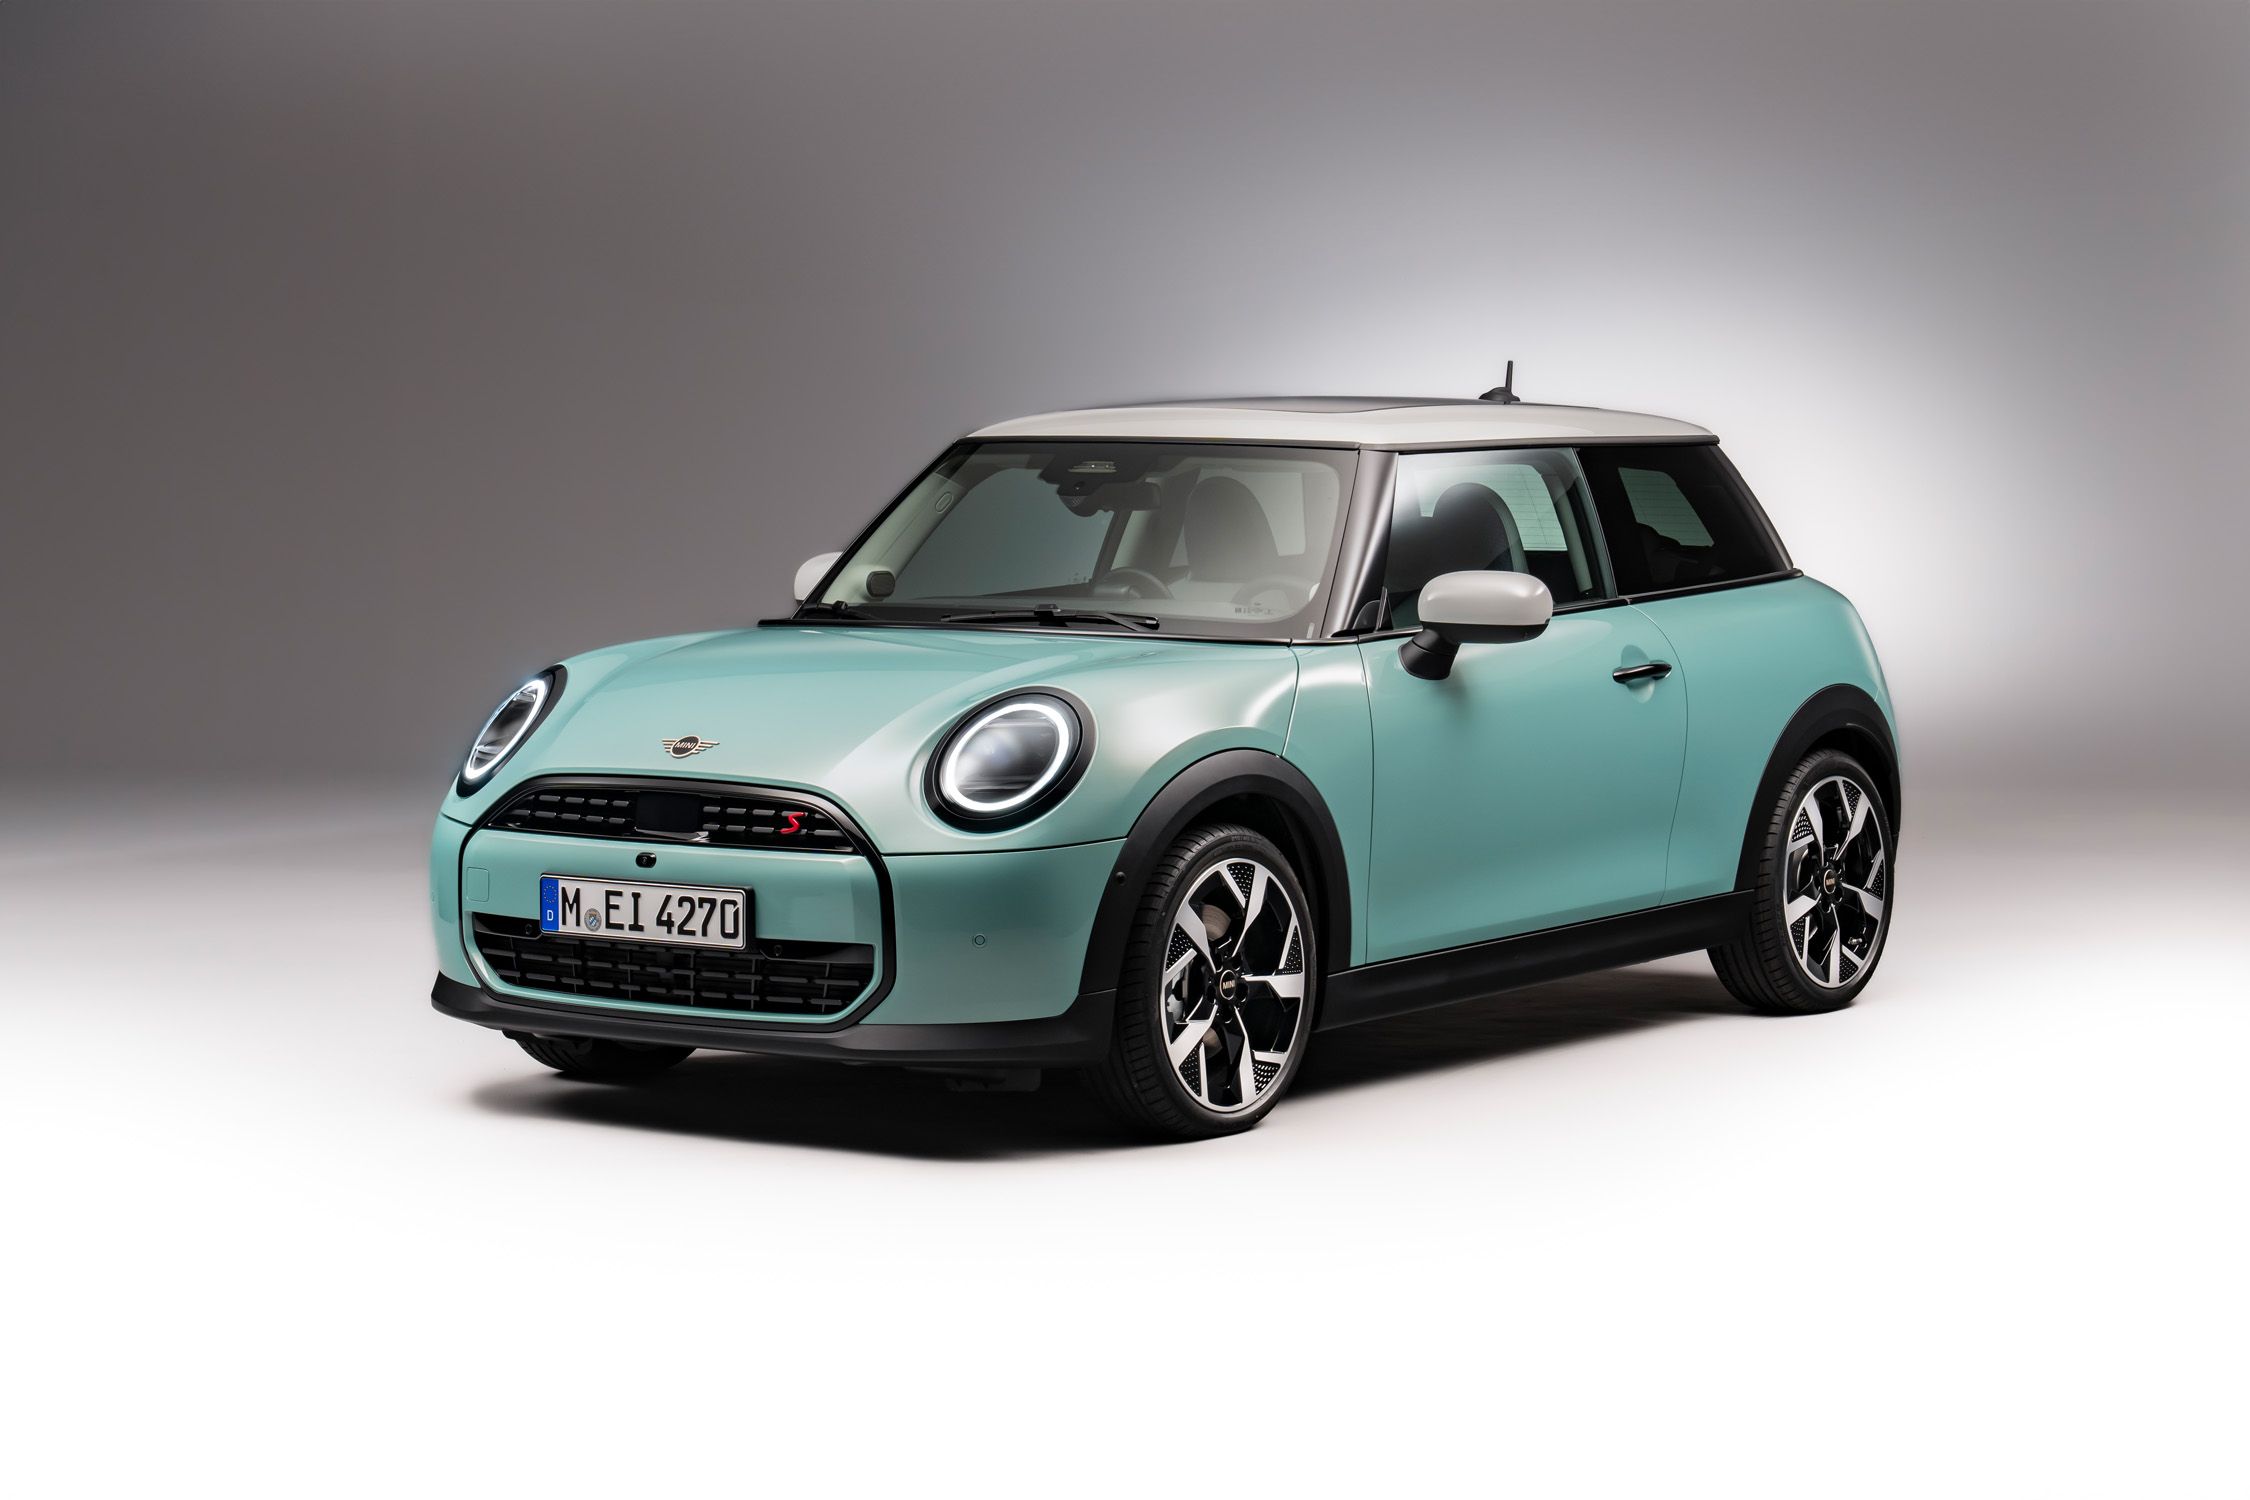 2025 MINI Countryman Technical Data Including Weight, Power